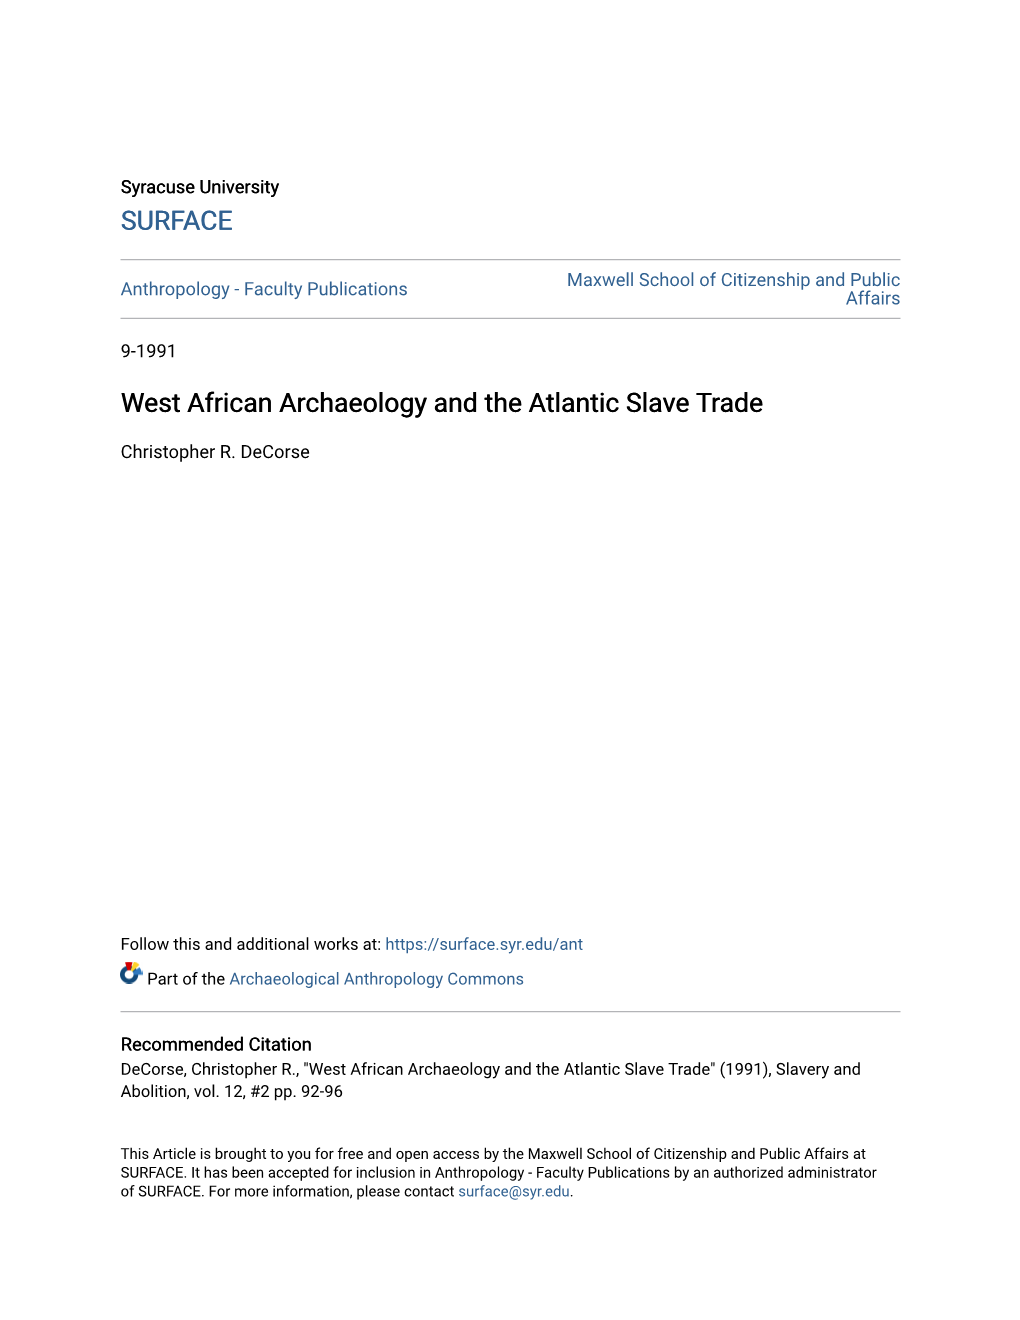 West African Archaeology and the Atlantic Slave Trade